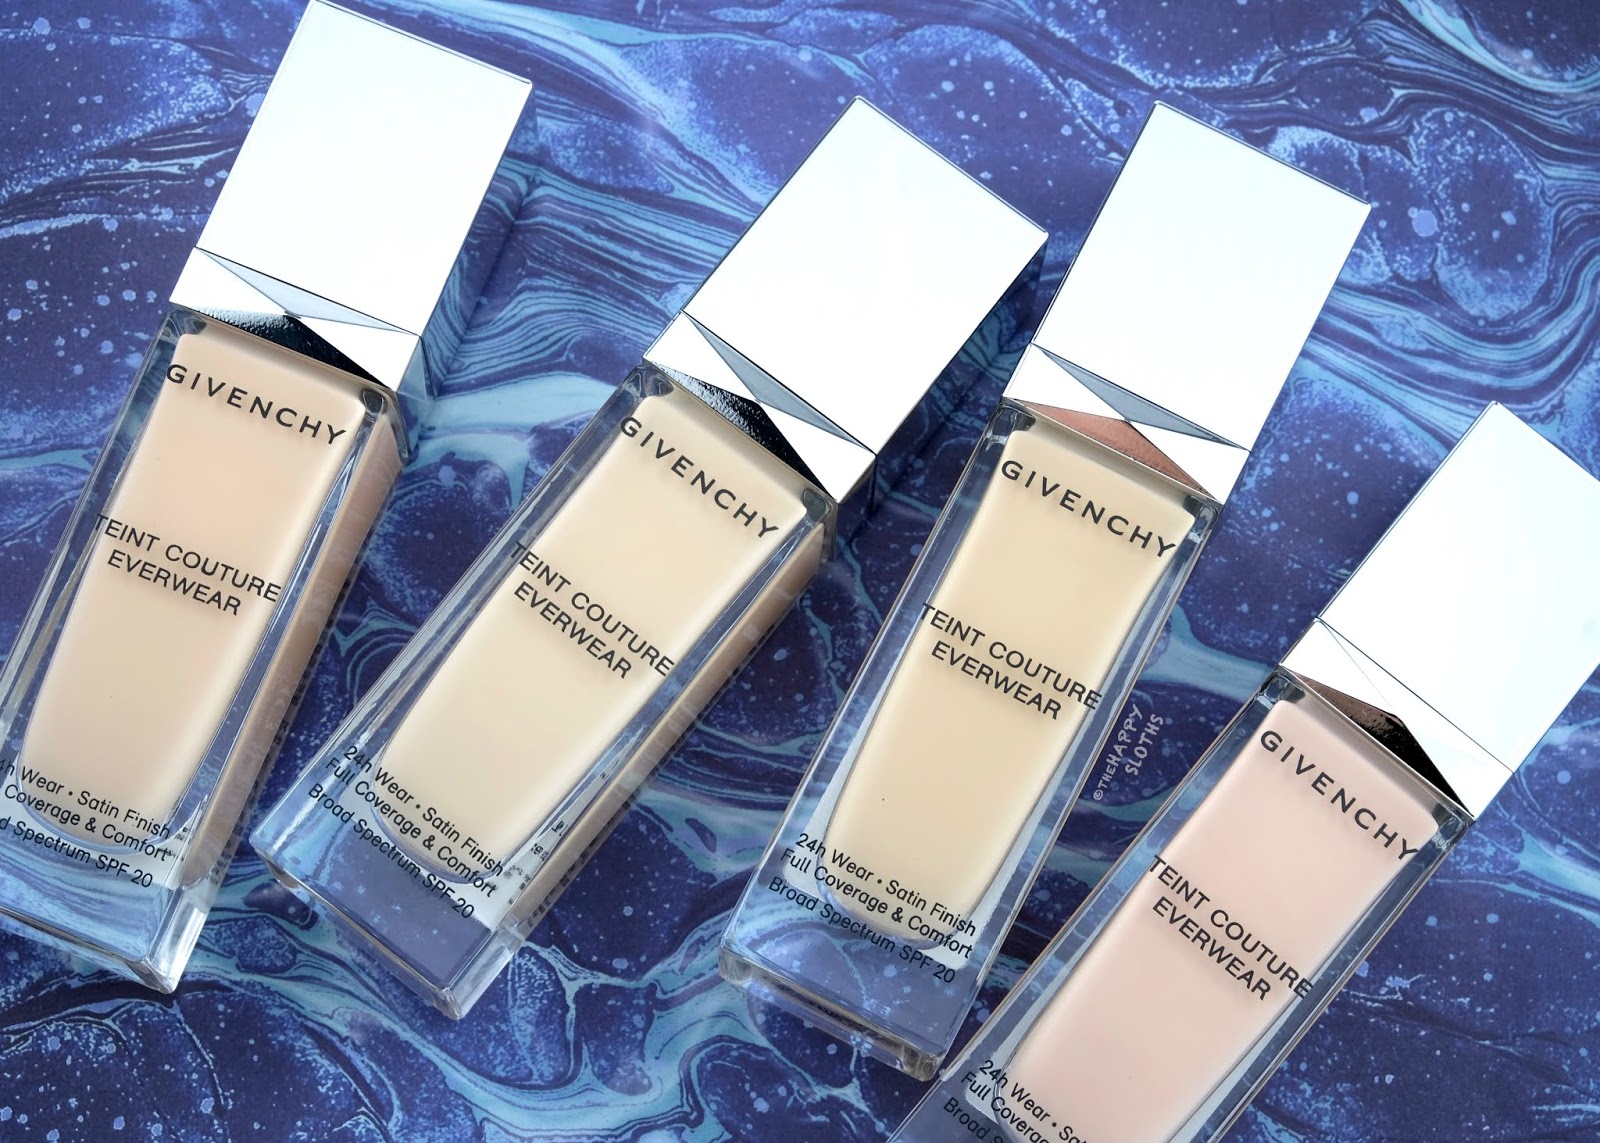 givenchy full coverage foundation